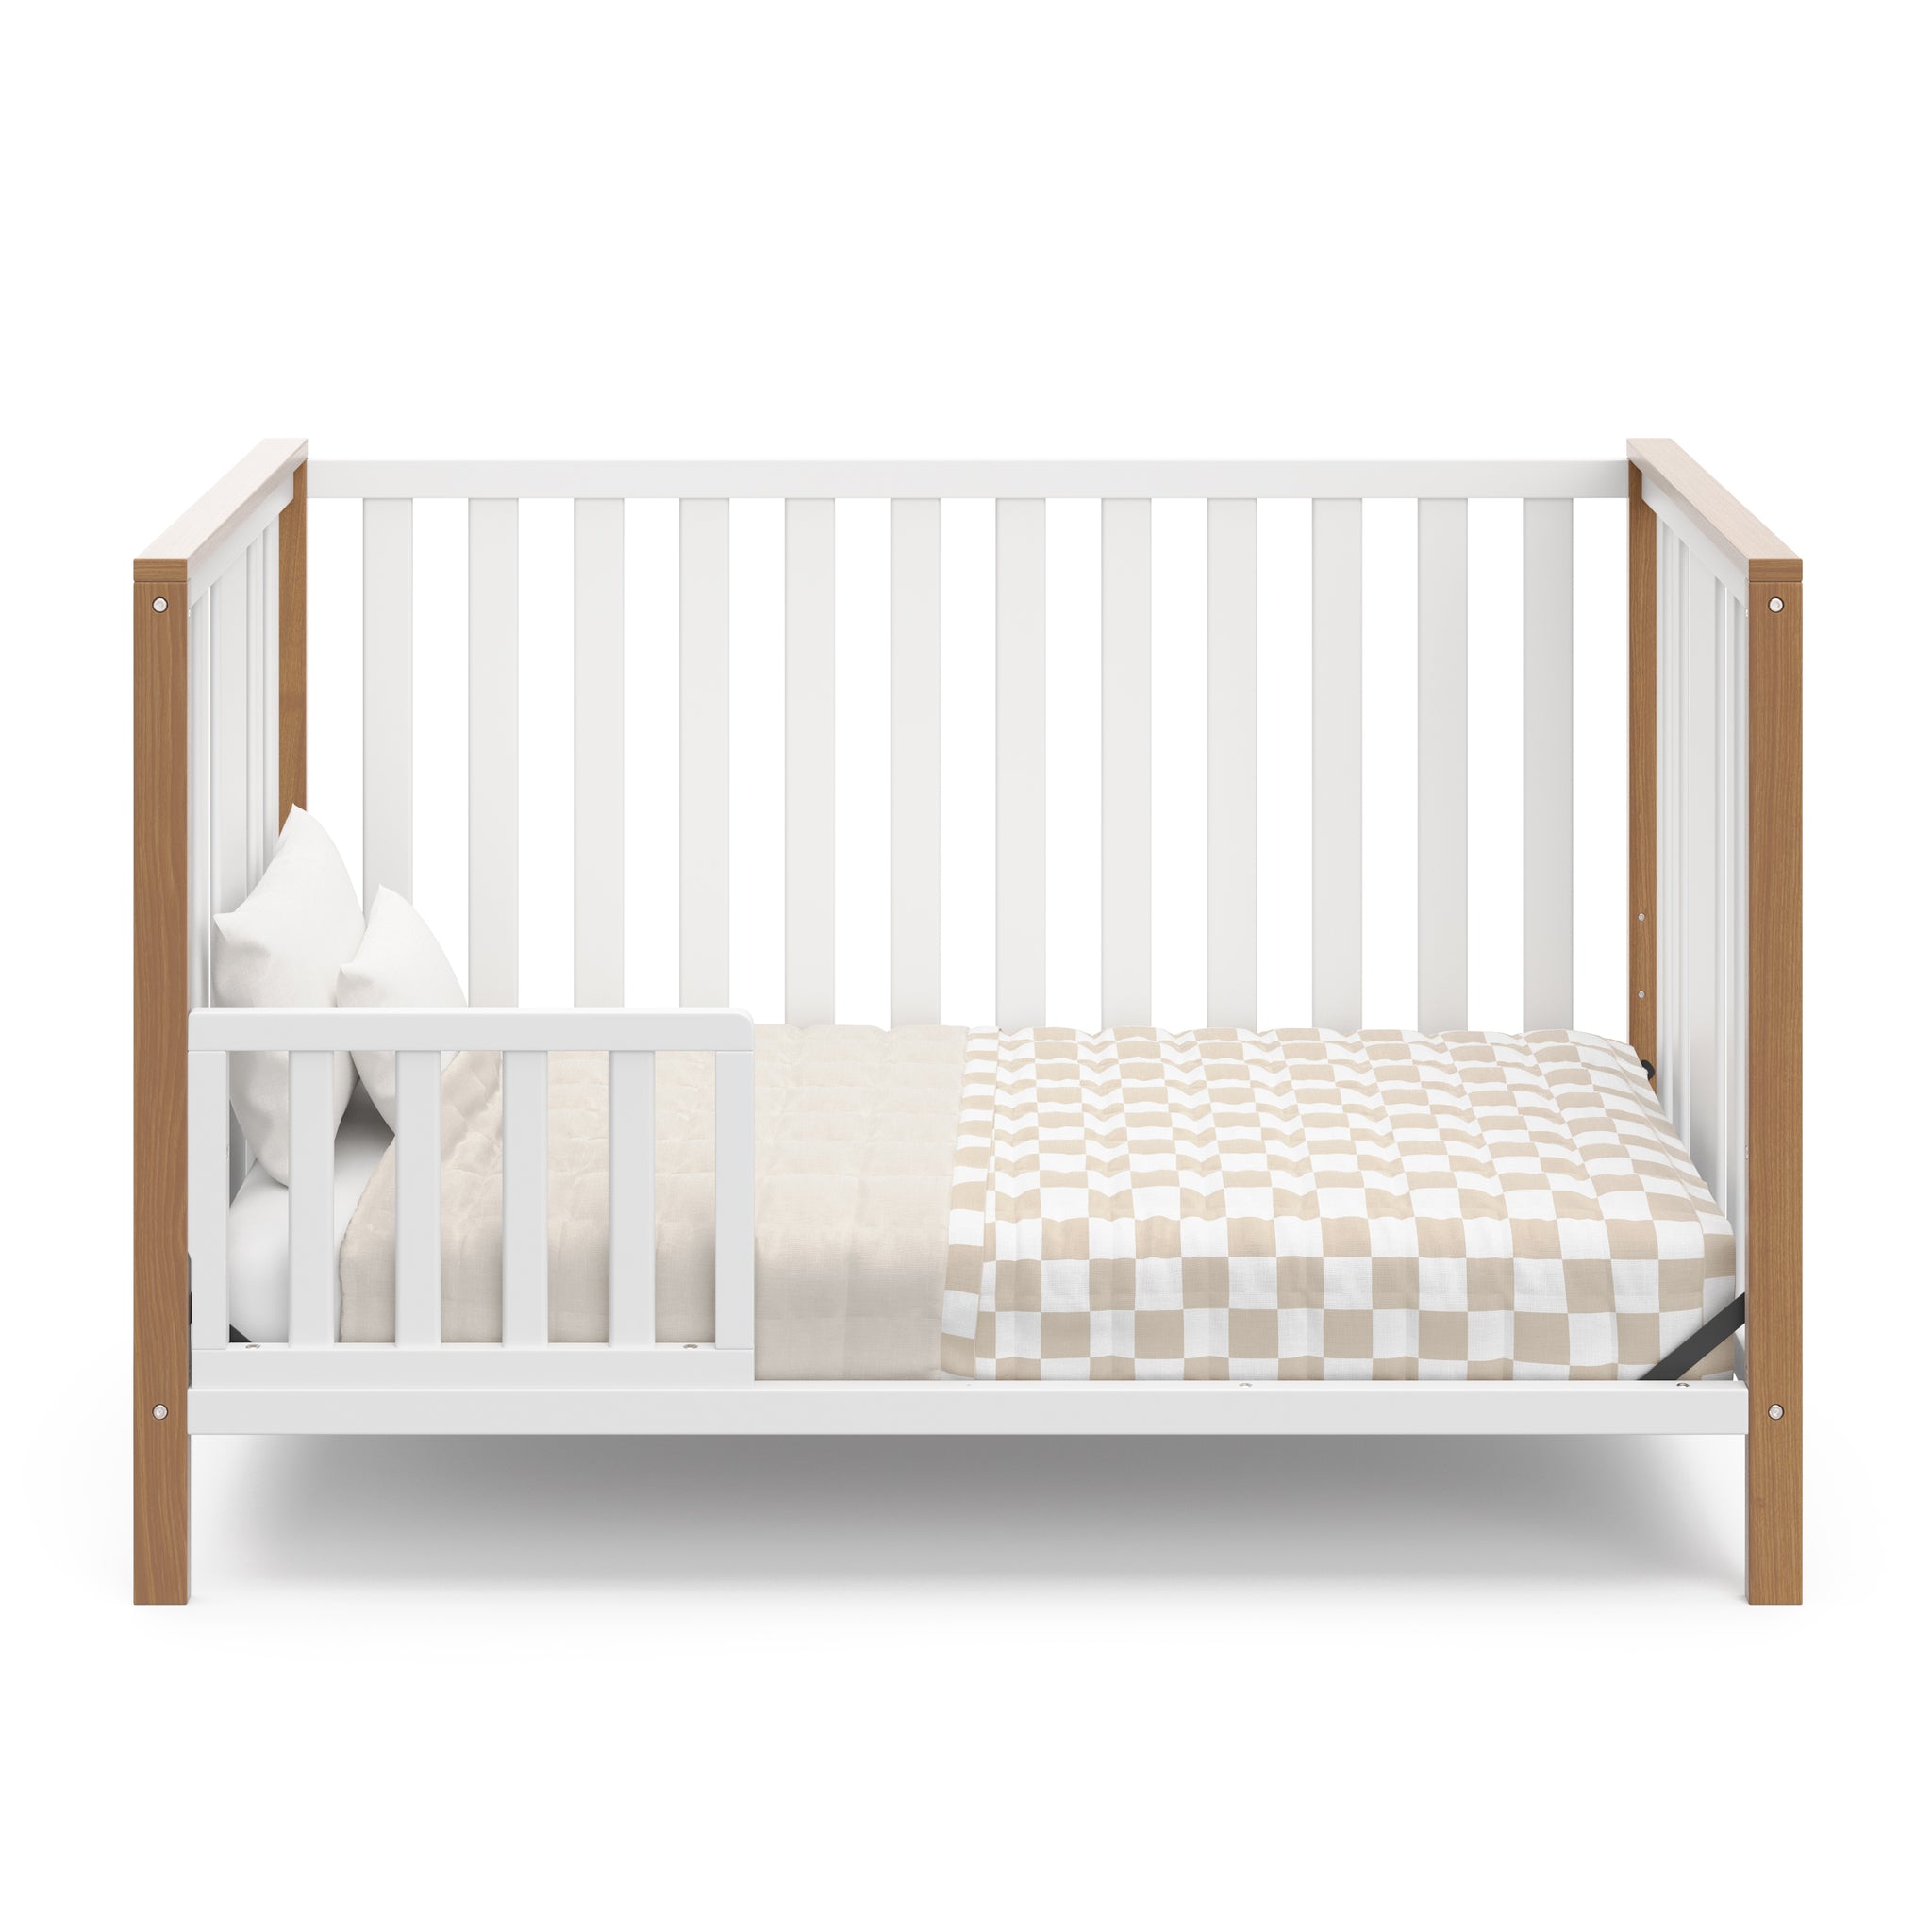 White crib with driftwood in toddler bed conversion with one safety guardrail